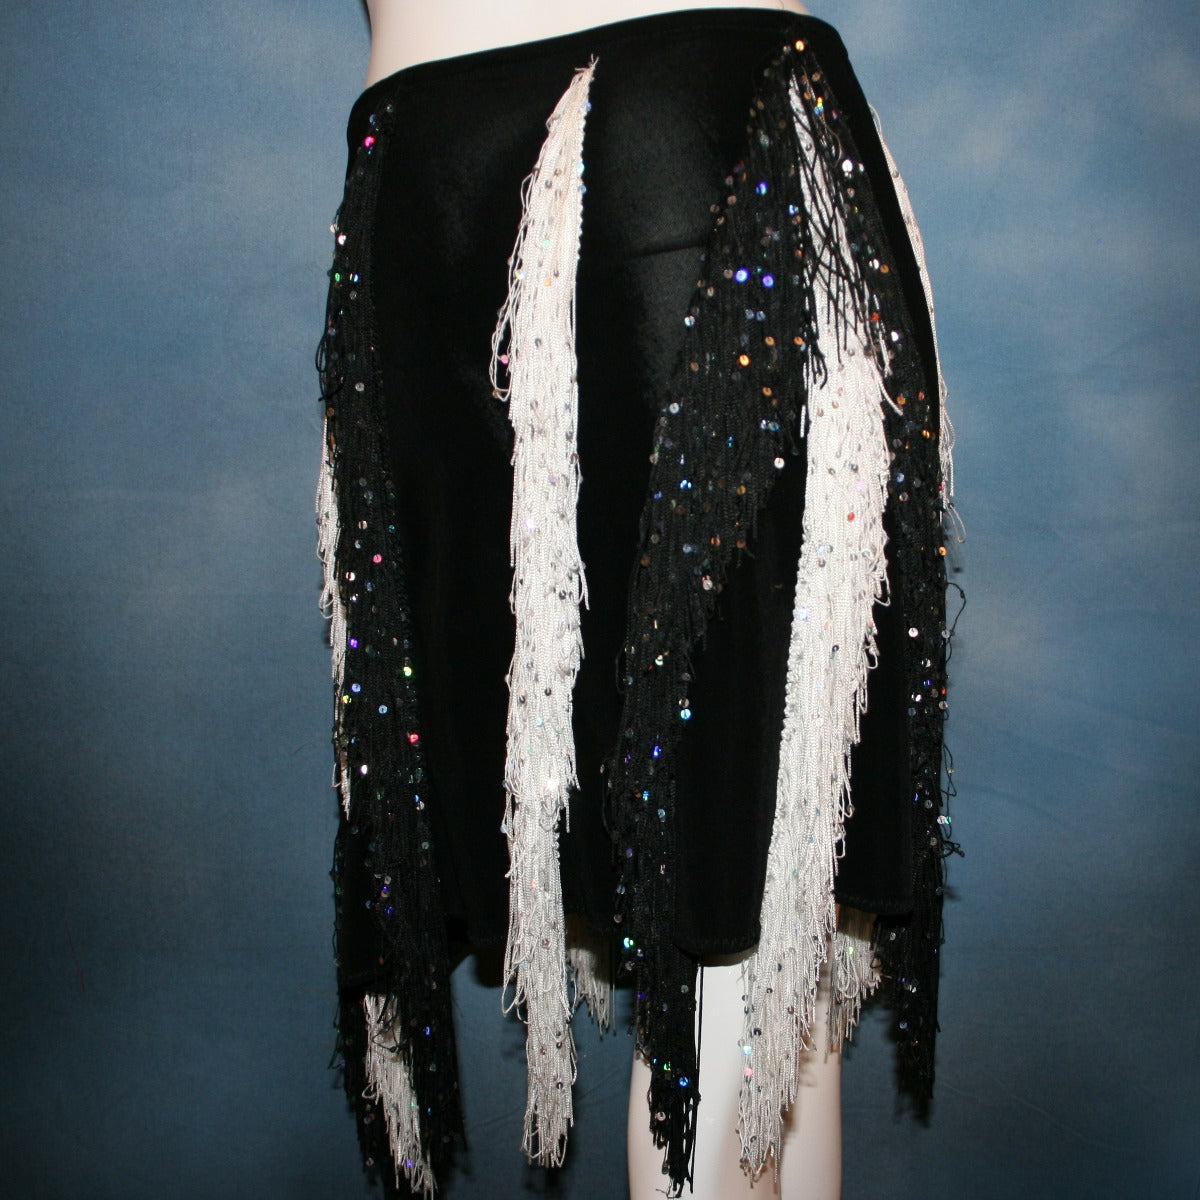 close view of Black & white Latin/rhythm skirt created of luxurious black solid slinky with vertical rows of black & white hologram sequined fringe, would pair greatly with a simple black bodysuit....or a custom created bodysuit or two would be fabulous for versatility, one on the simple classic side & one fabulously ornate with Swarovski rhinestone work!   